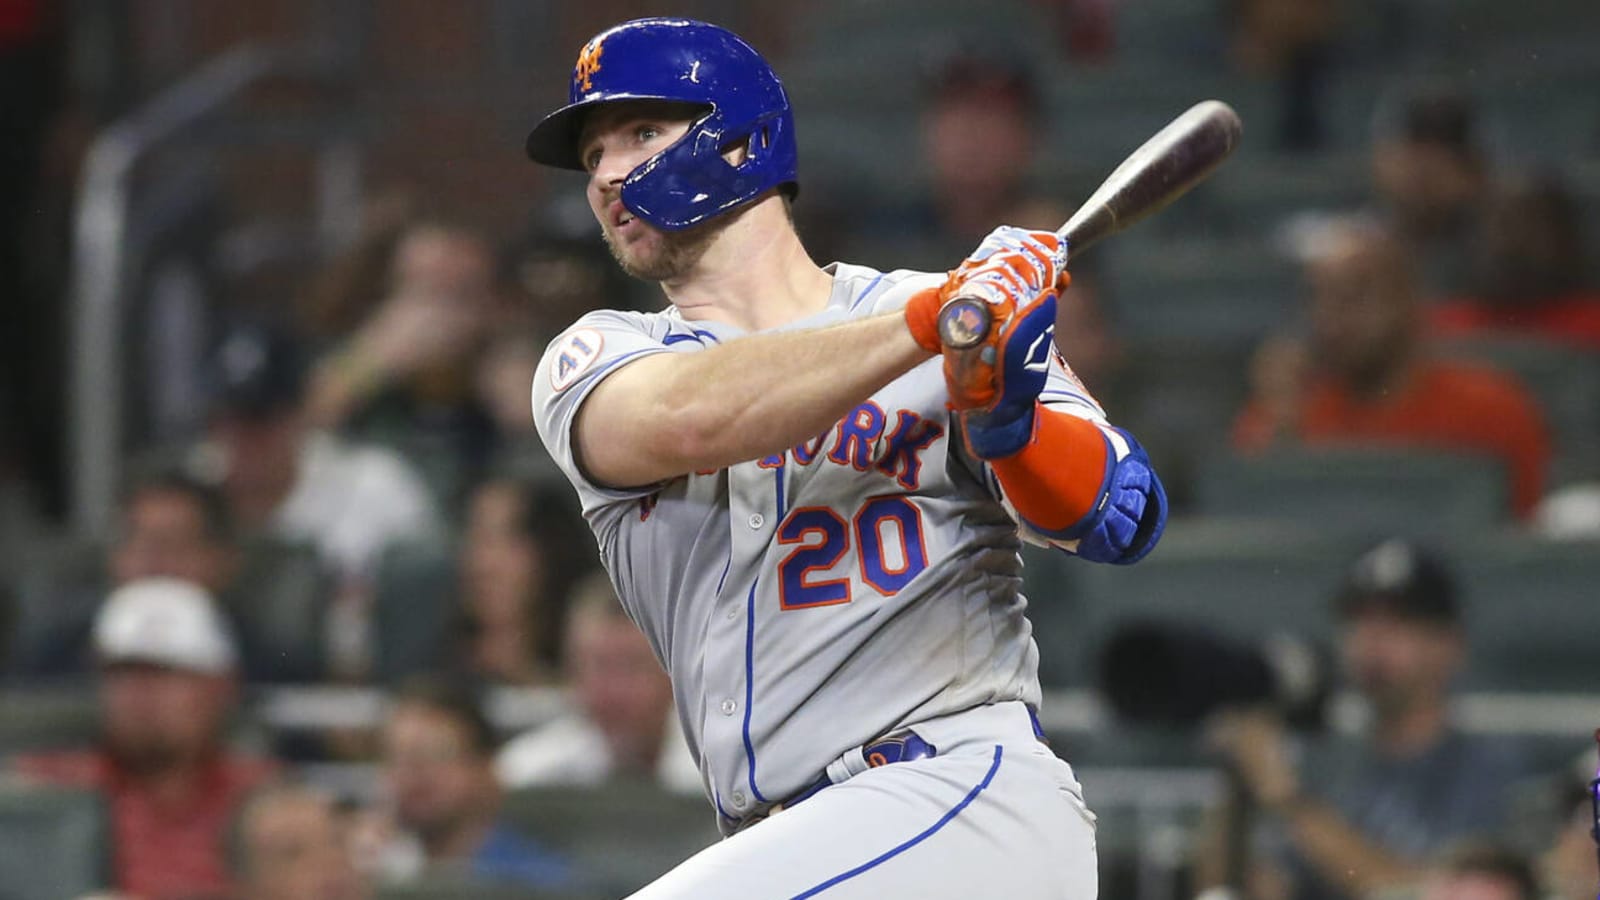 Mets star Pete Alonso claims he nearly died in car accident